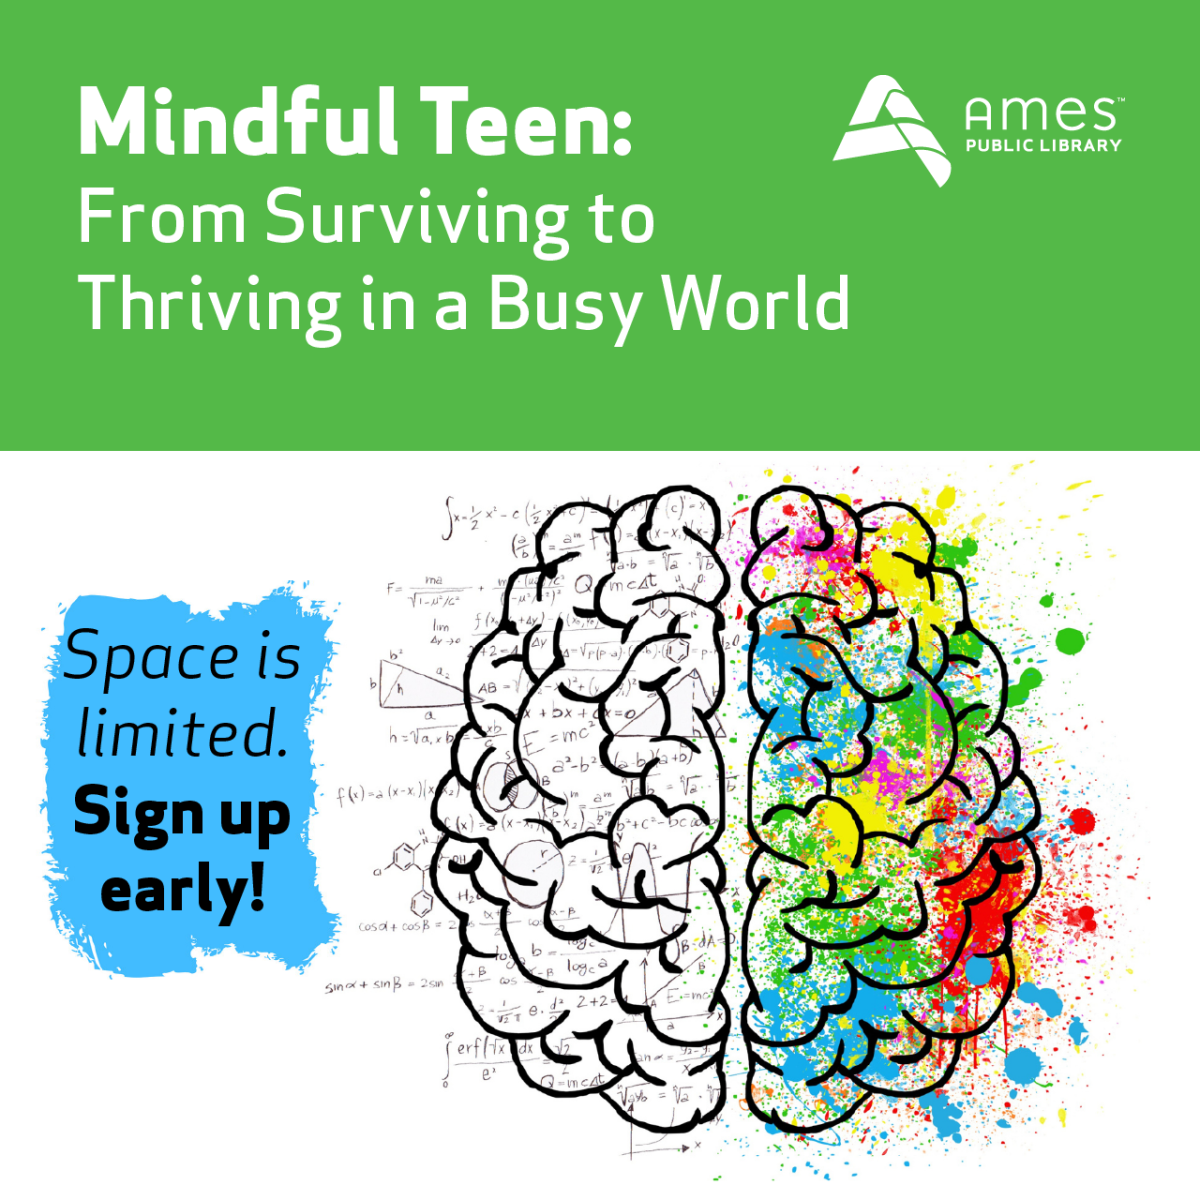 Mindful Teen: From Surviving to Thriving in a Busy World. Space is limited. Sign up early!